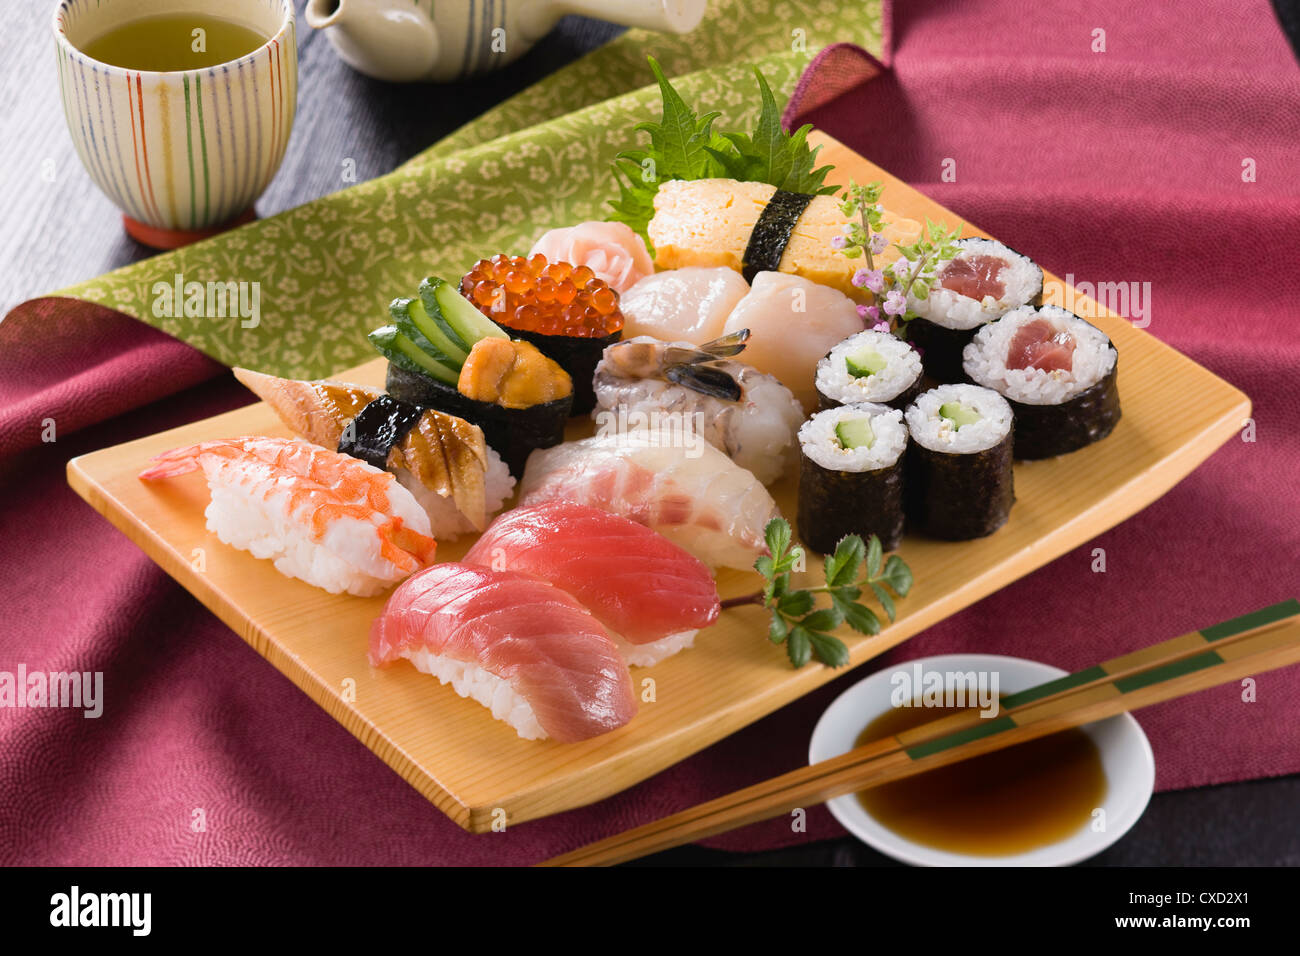 Assorted Sushi on Wooden Plate Stock Photo